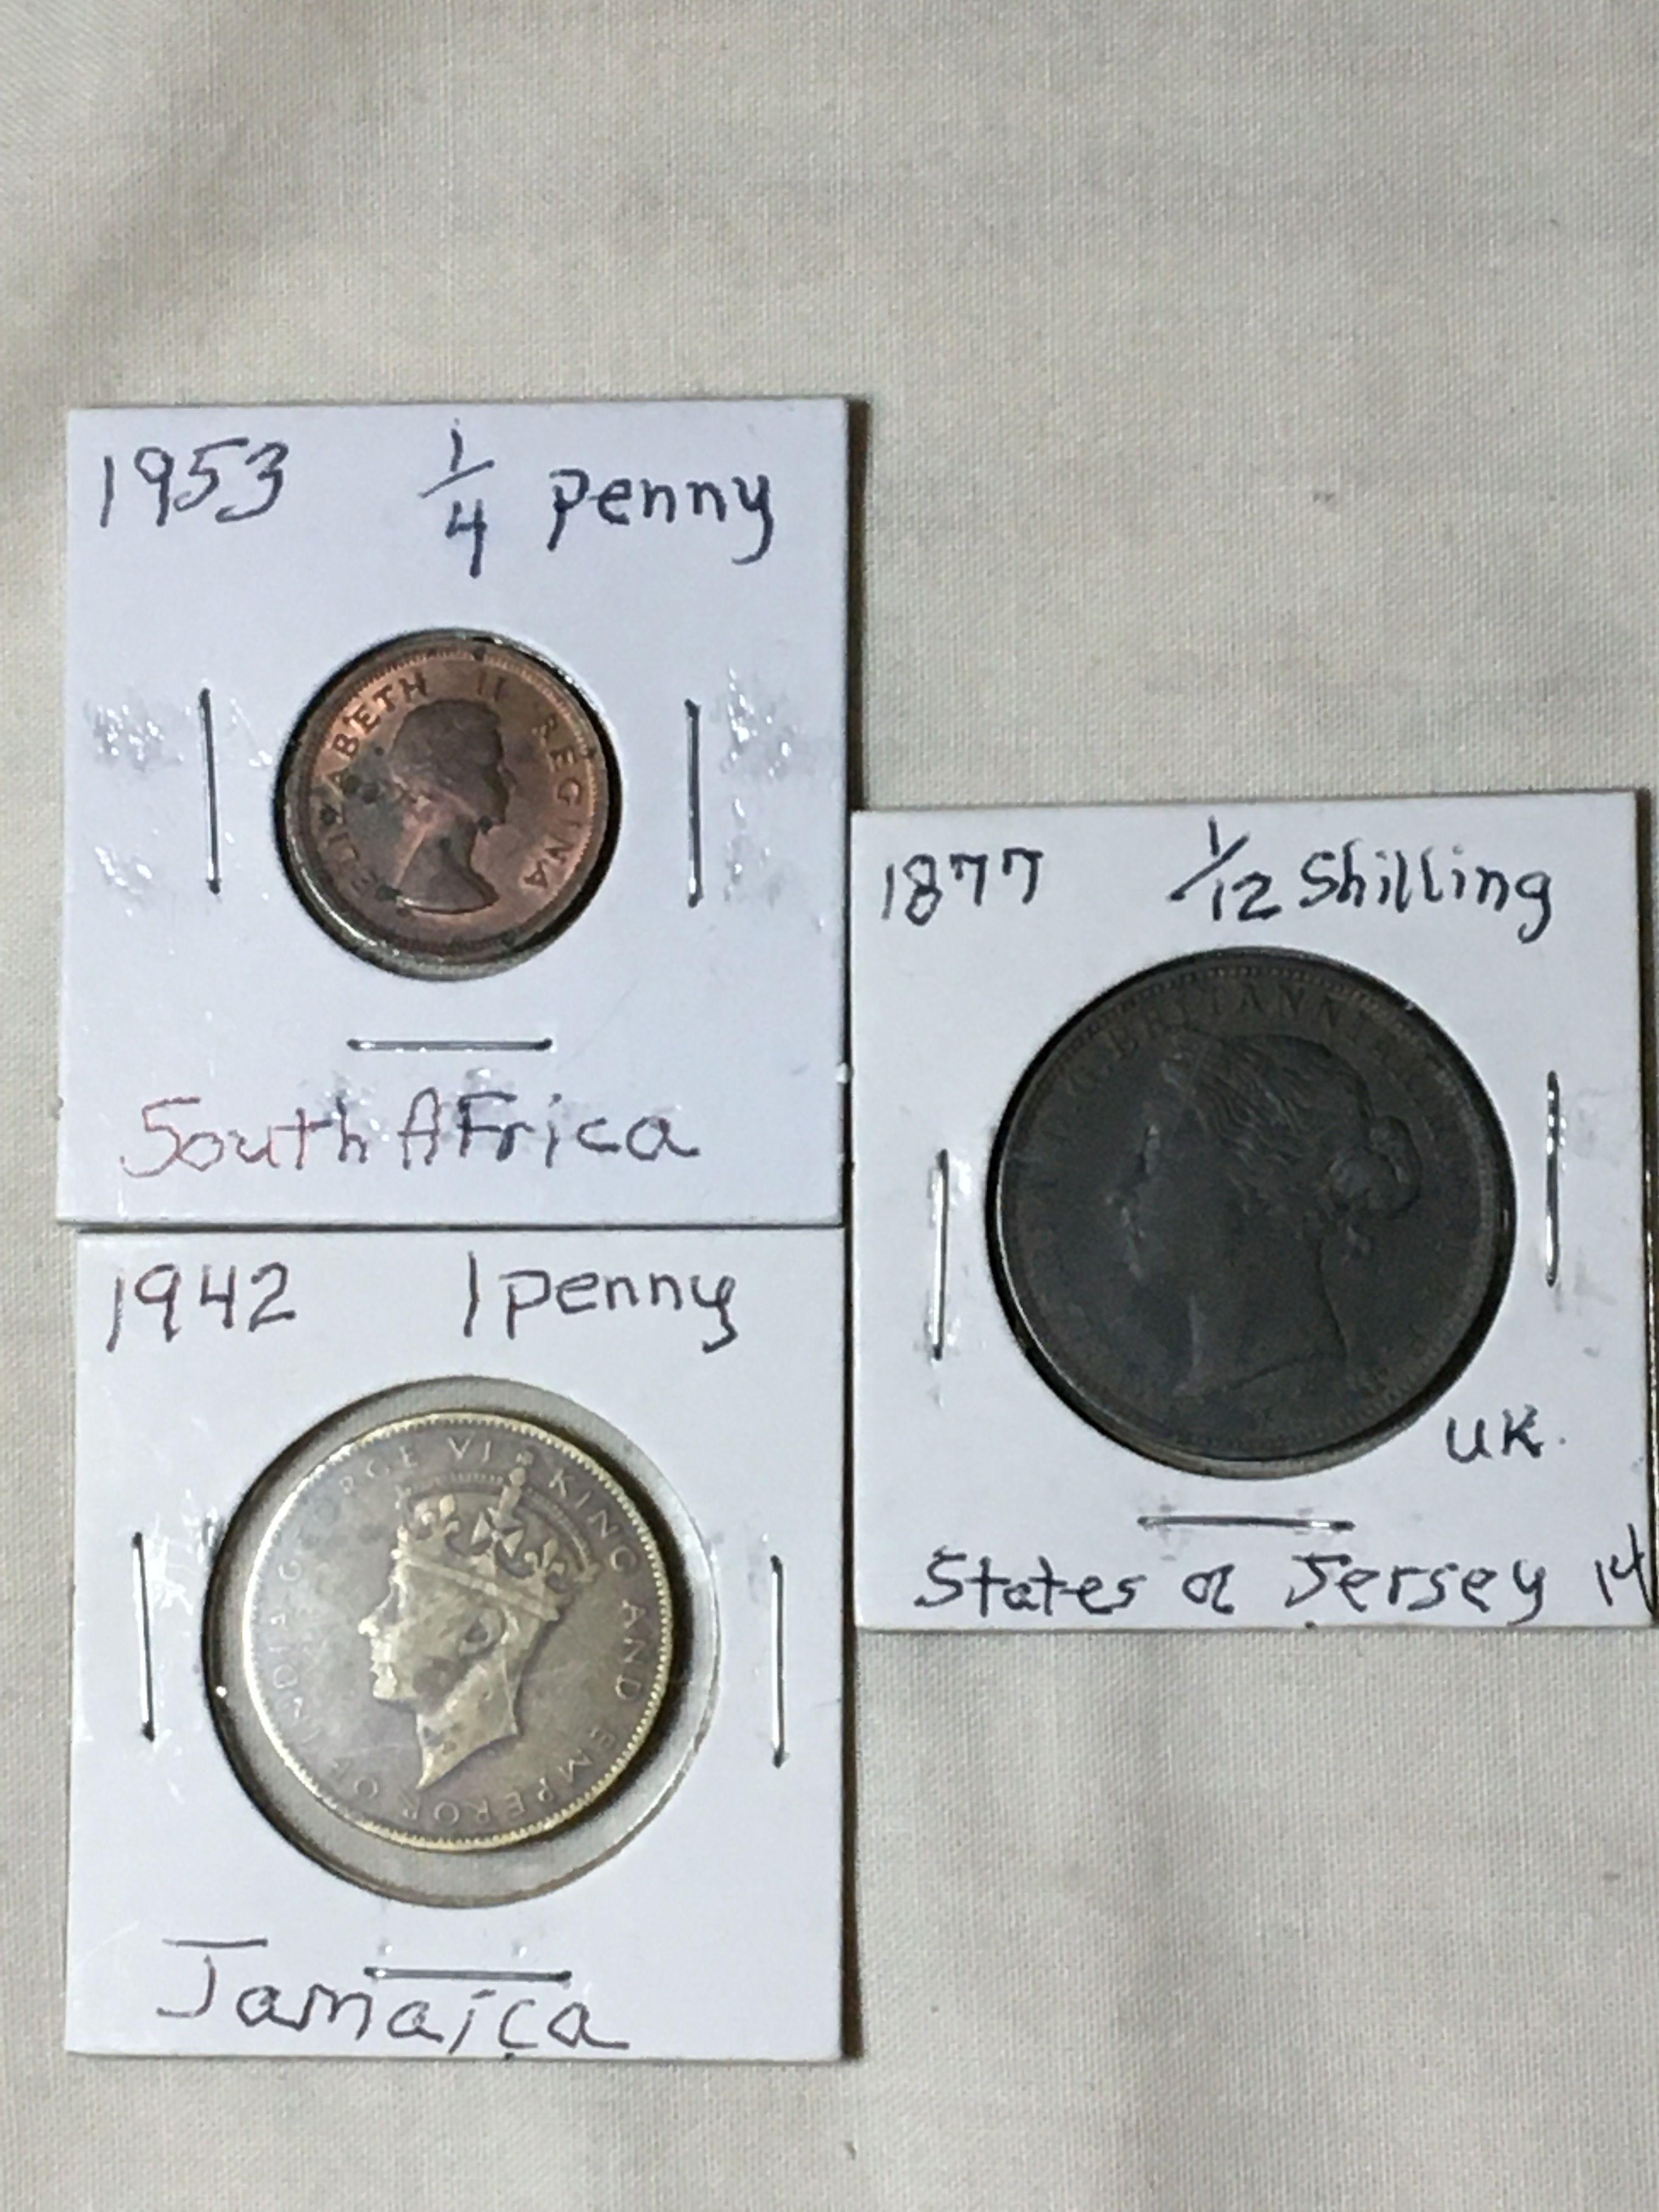 (3) Coins, 1877 1/12 Shilling States Of Jersey, 1942 1 Penny Jamaica, 1953 1/4 Penny South Africa